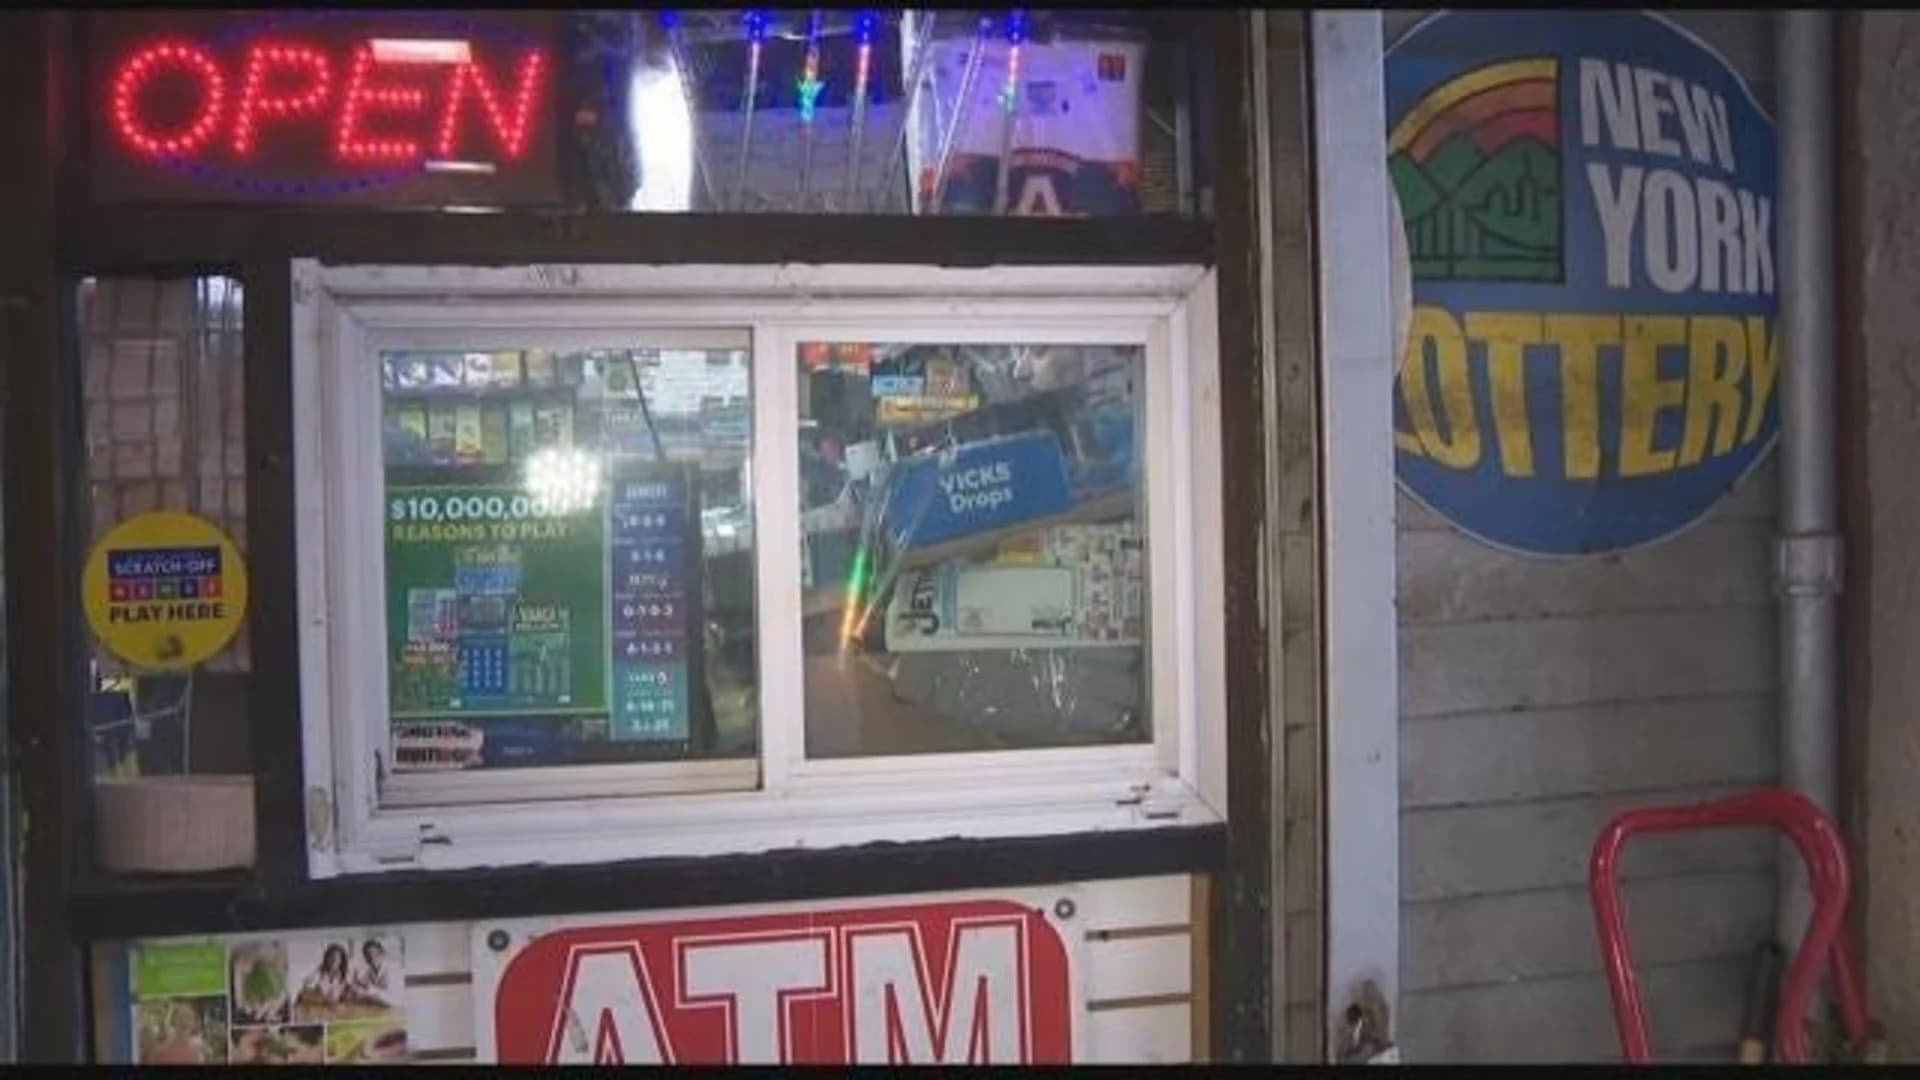 $1 million second place Powerball ticket sold in Pelham Bay